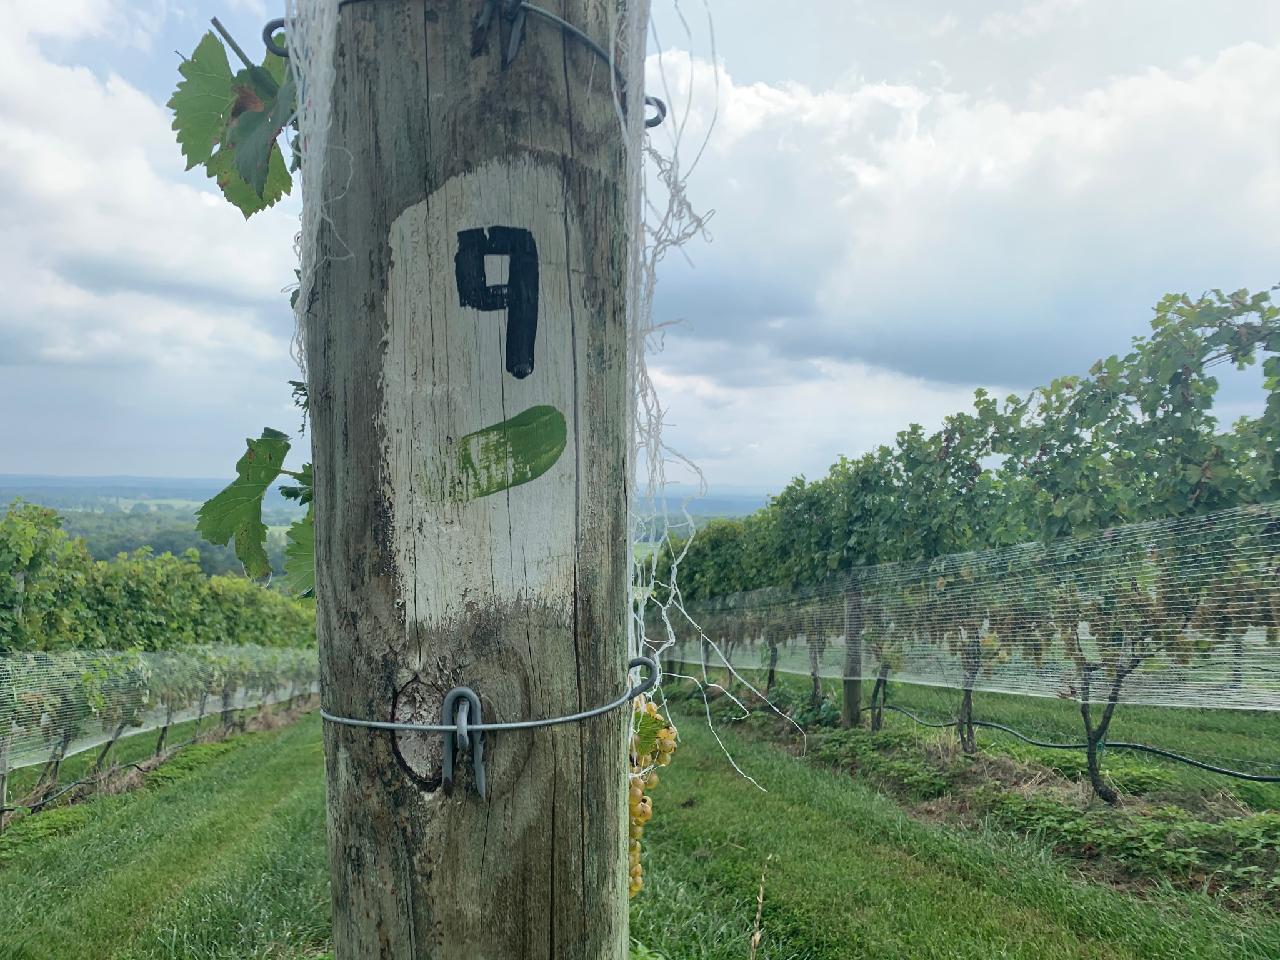 Post marked number 9 in October One Vineyard